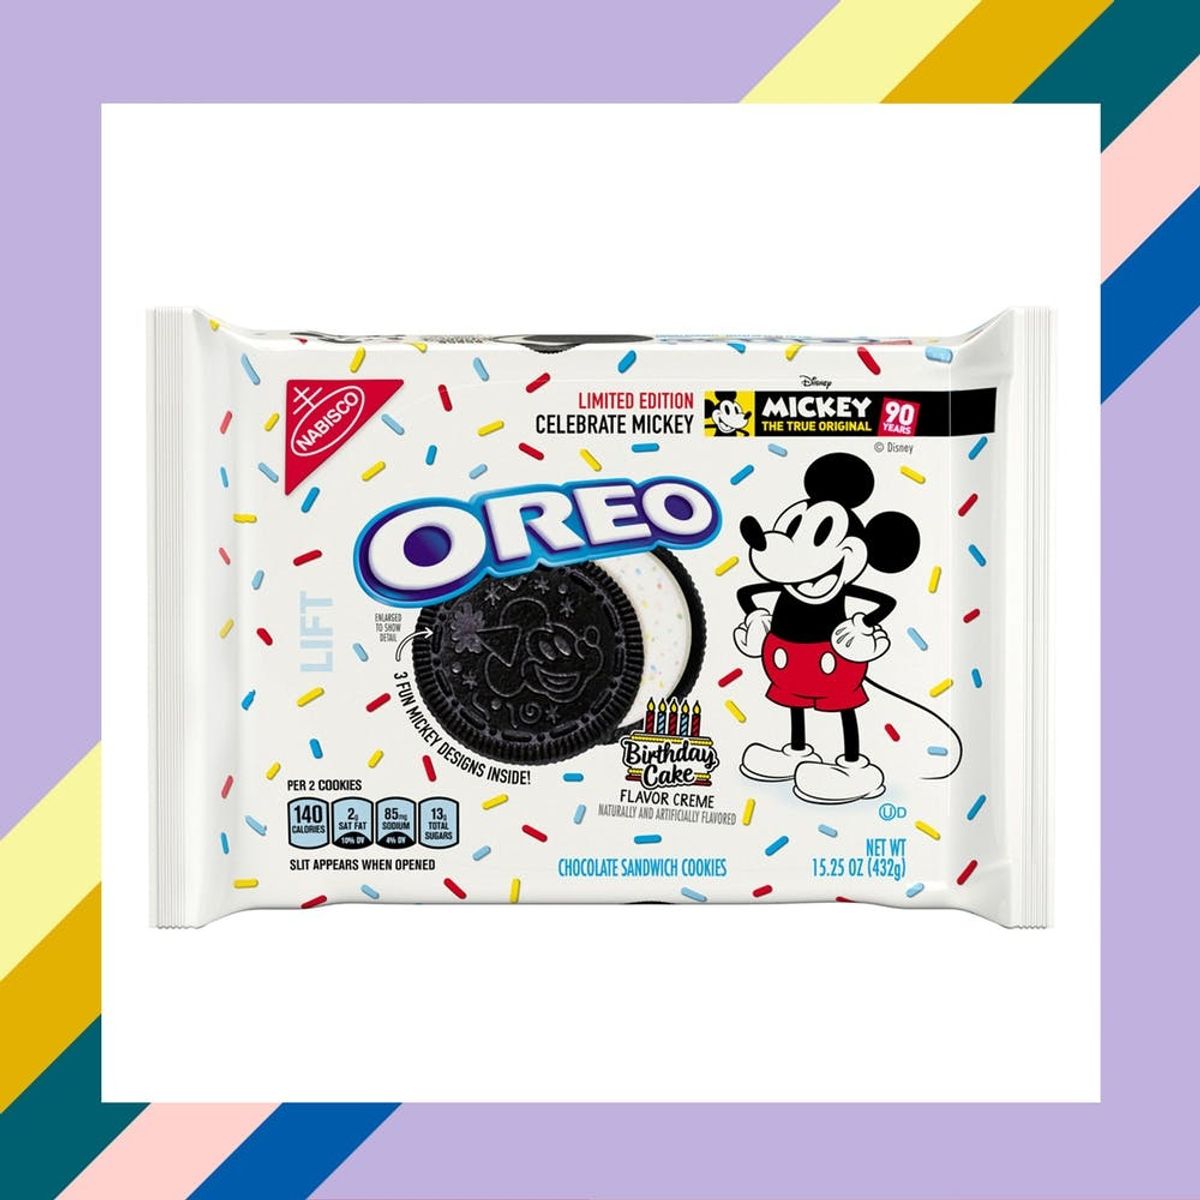 Oreo’s Celebrating Mickey Mouse’s 90th Birthday With Sprinkle-Studded Cookies